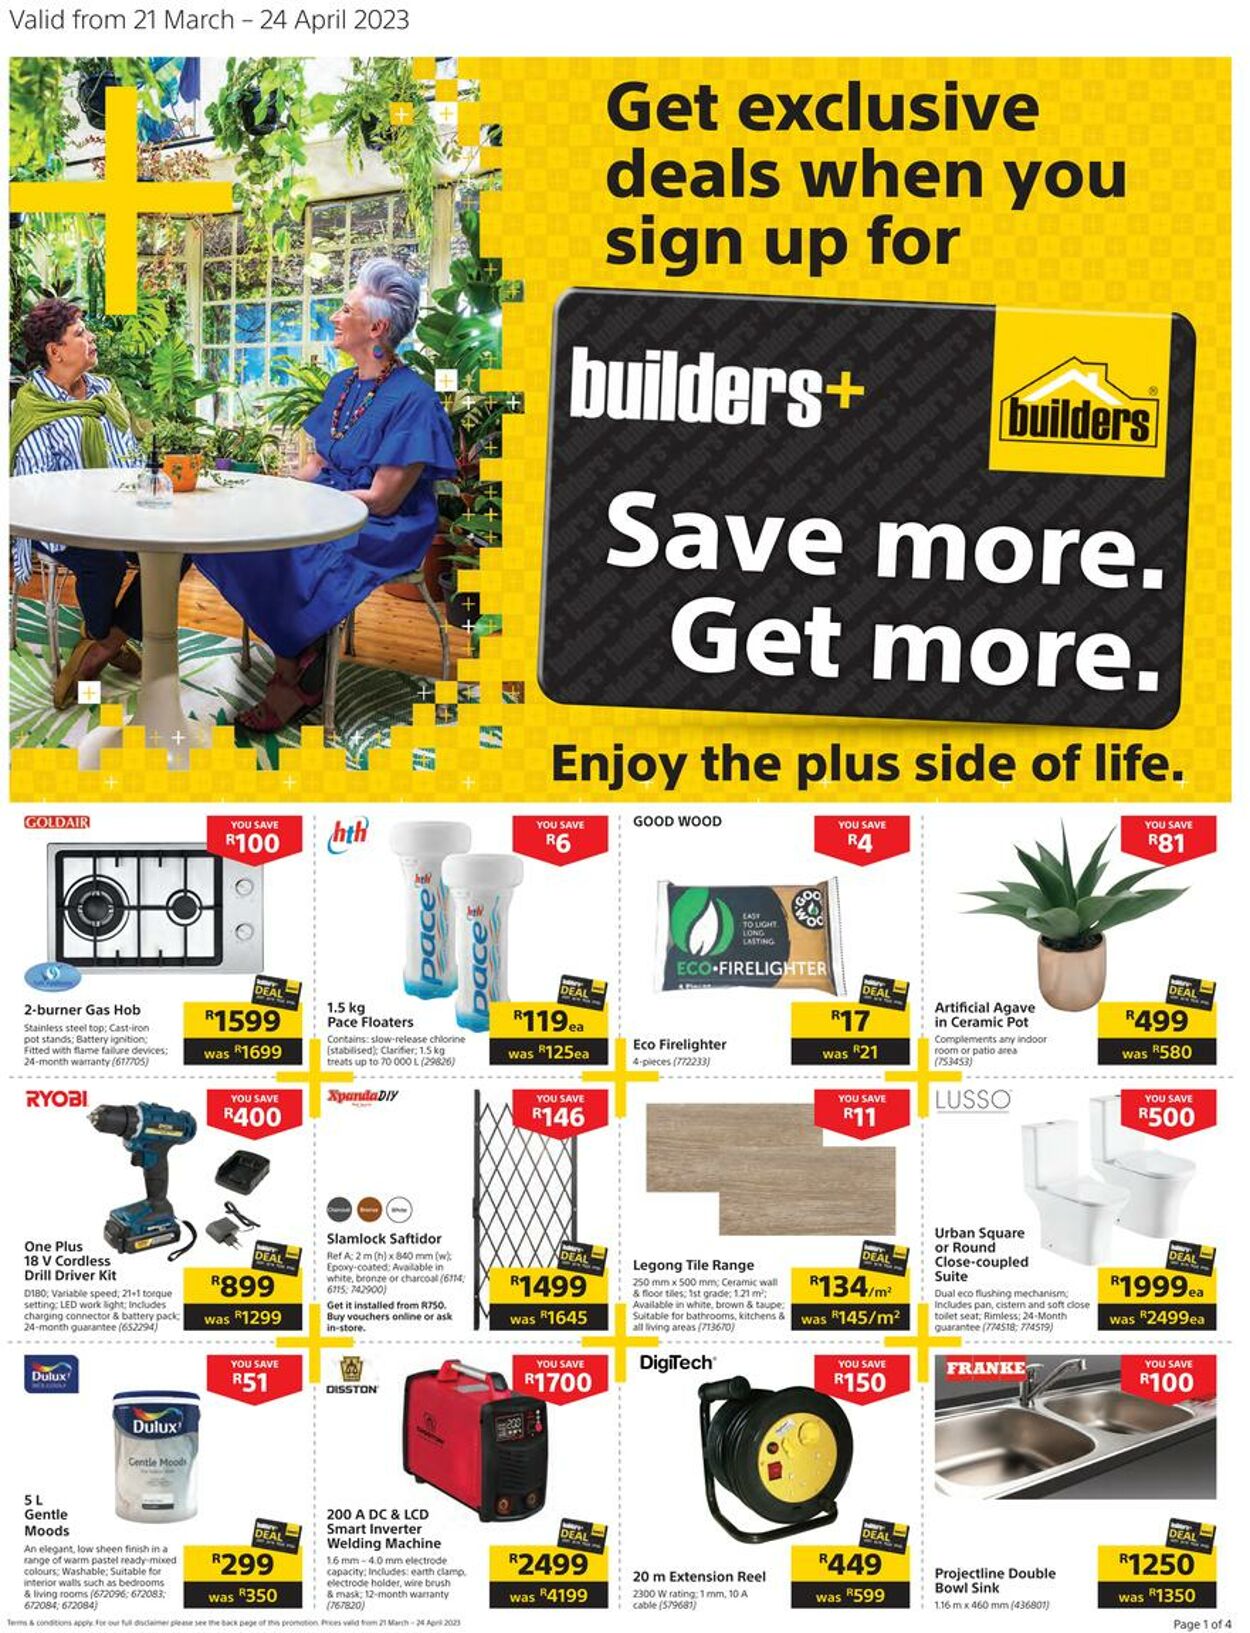 Special Builders Warehouse 21.03.2023 - 24.04.2023